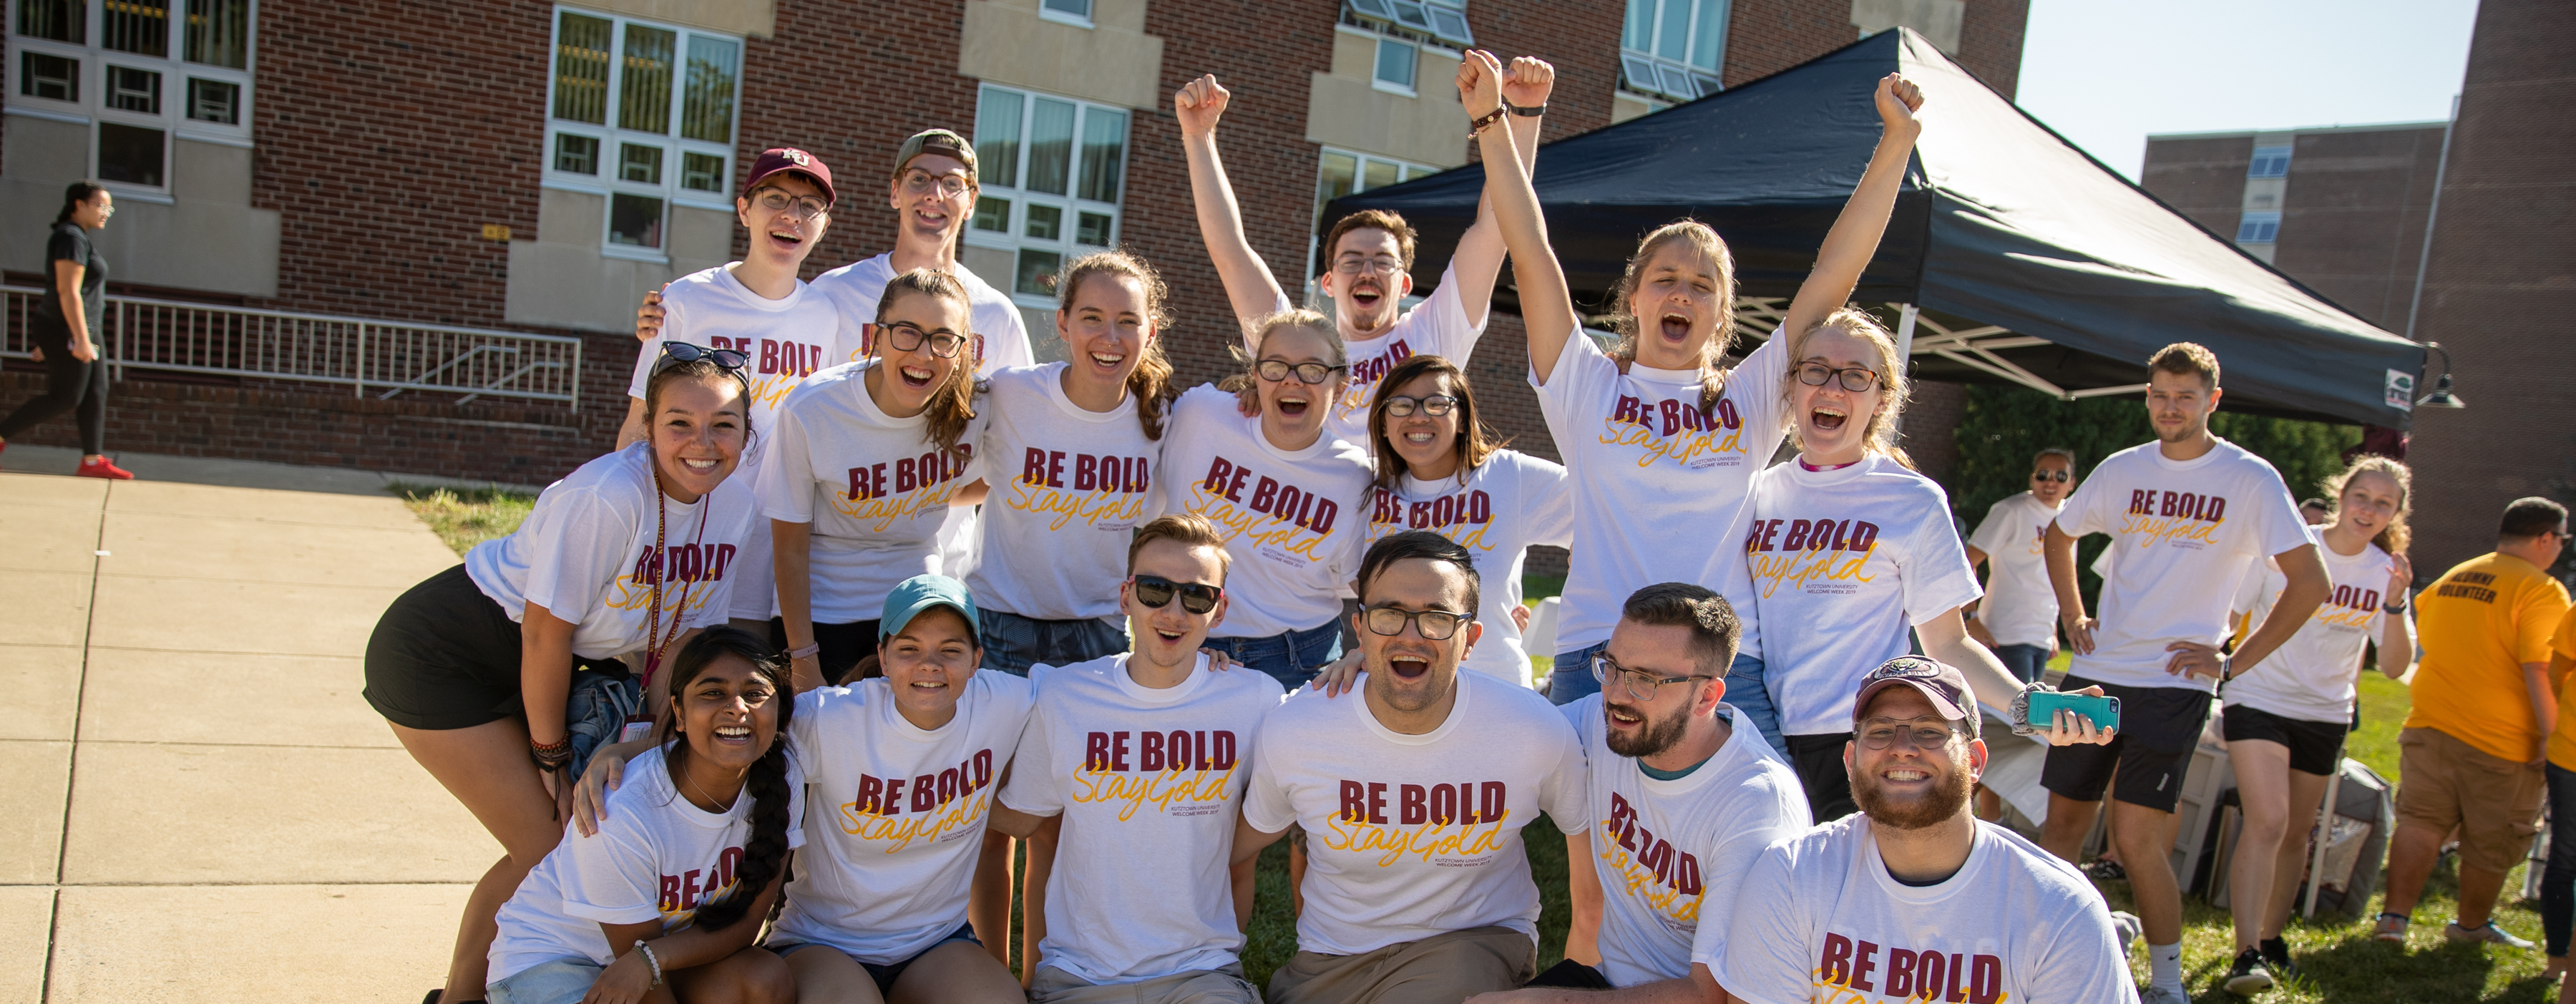 Group of newly accepted students, smiling and wearing t-shirts that say "Be Bold"